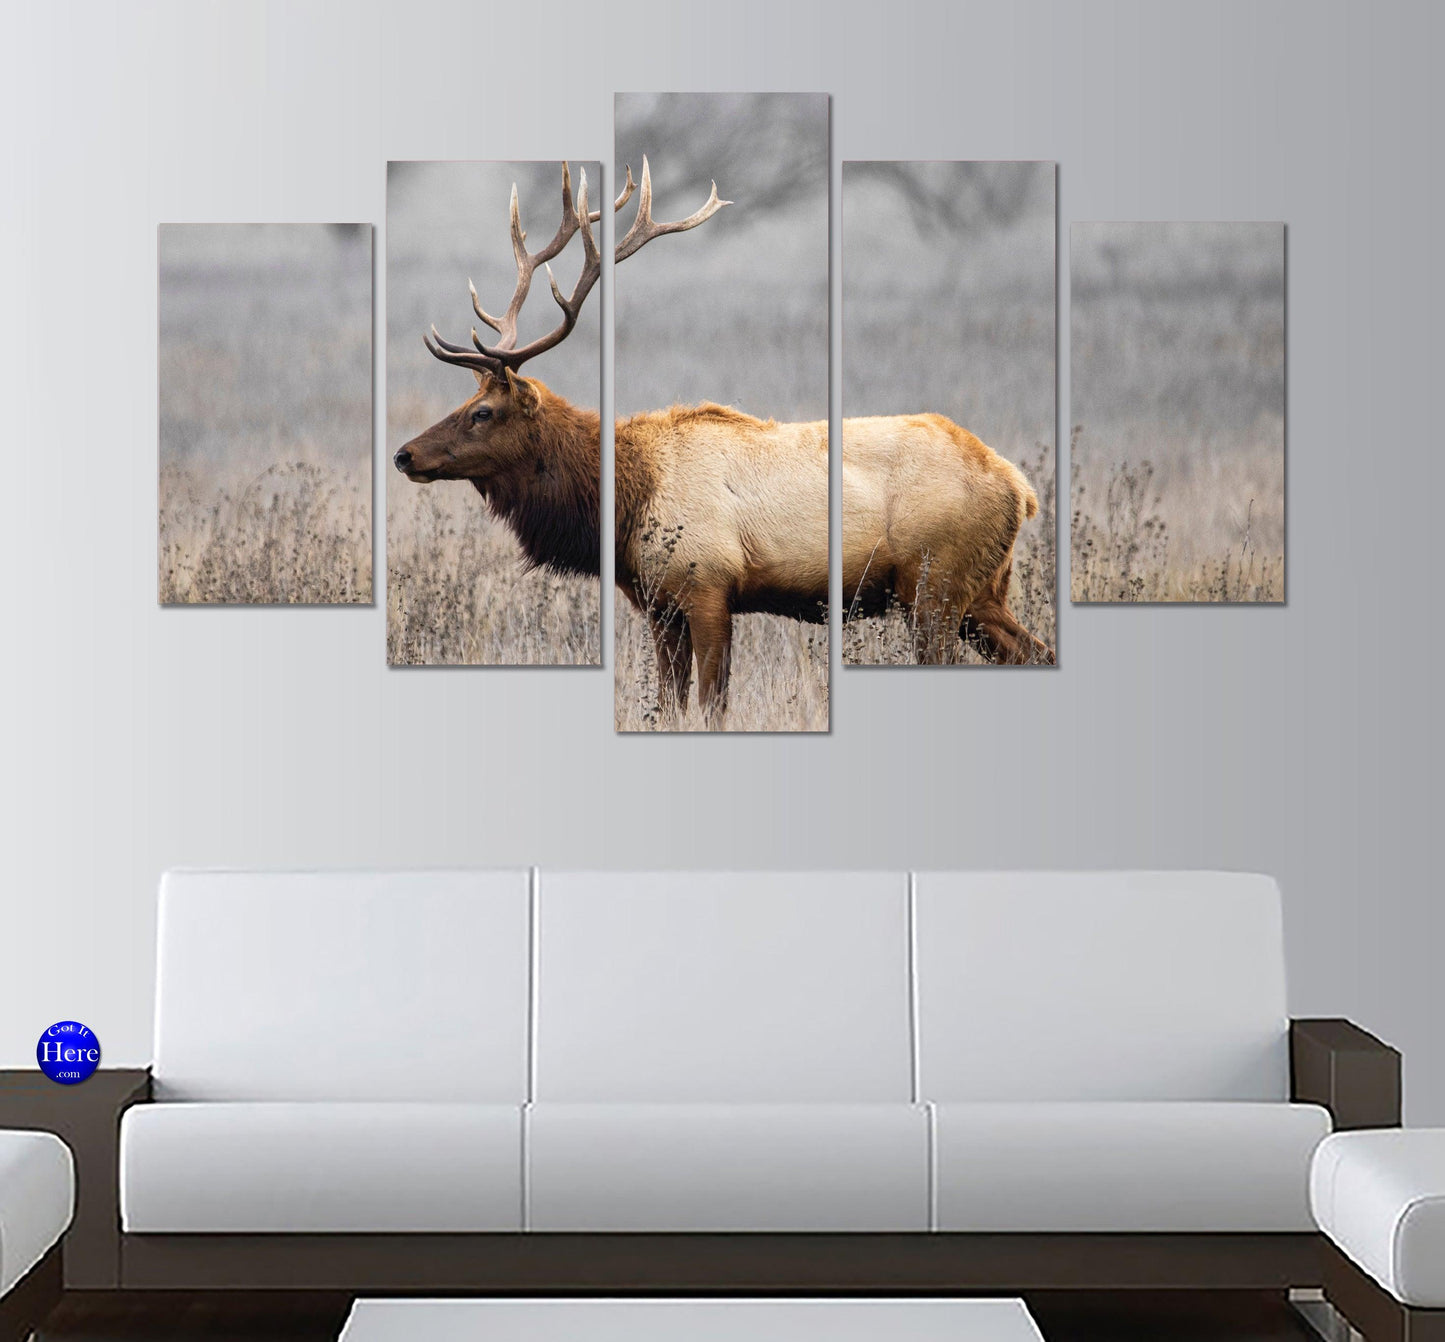 Big Stag with Massive Antlers Standing in Field 5 Panel Canvas Print Wall Art - GotItHere.com